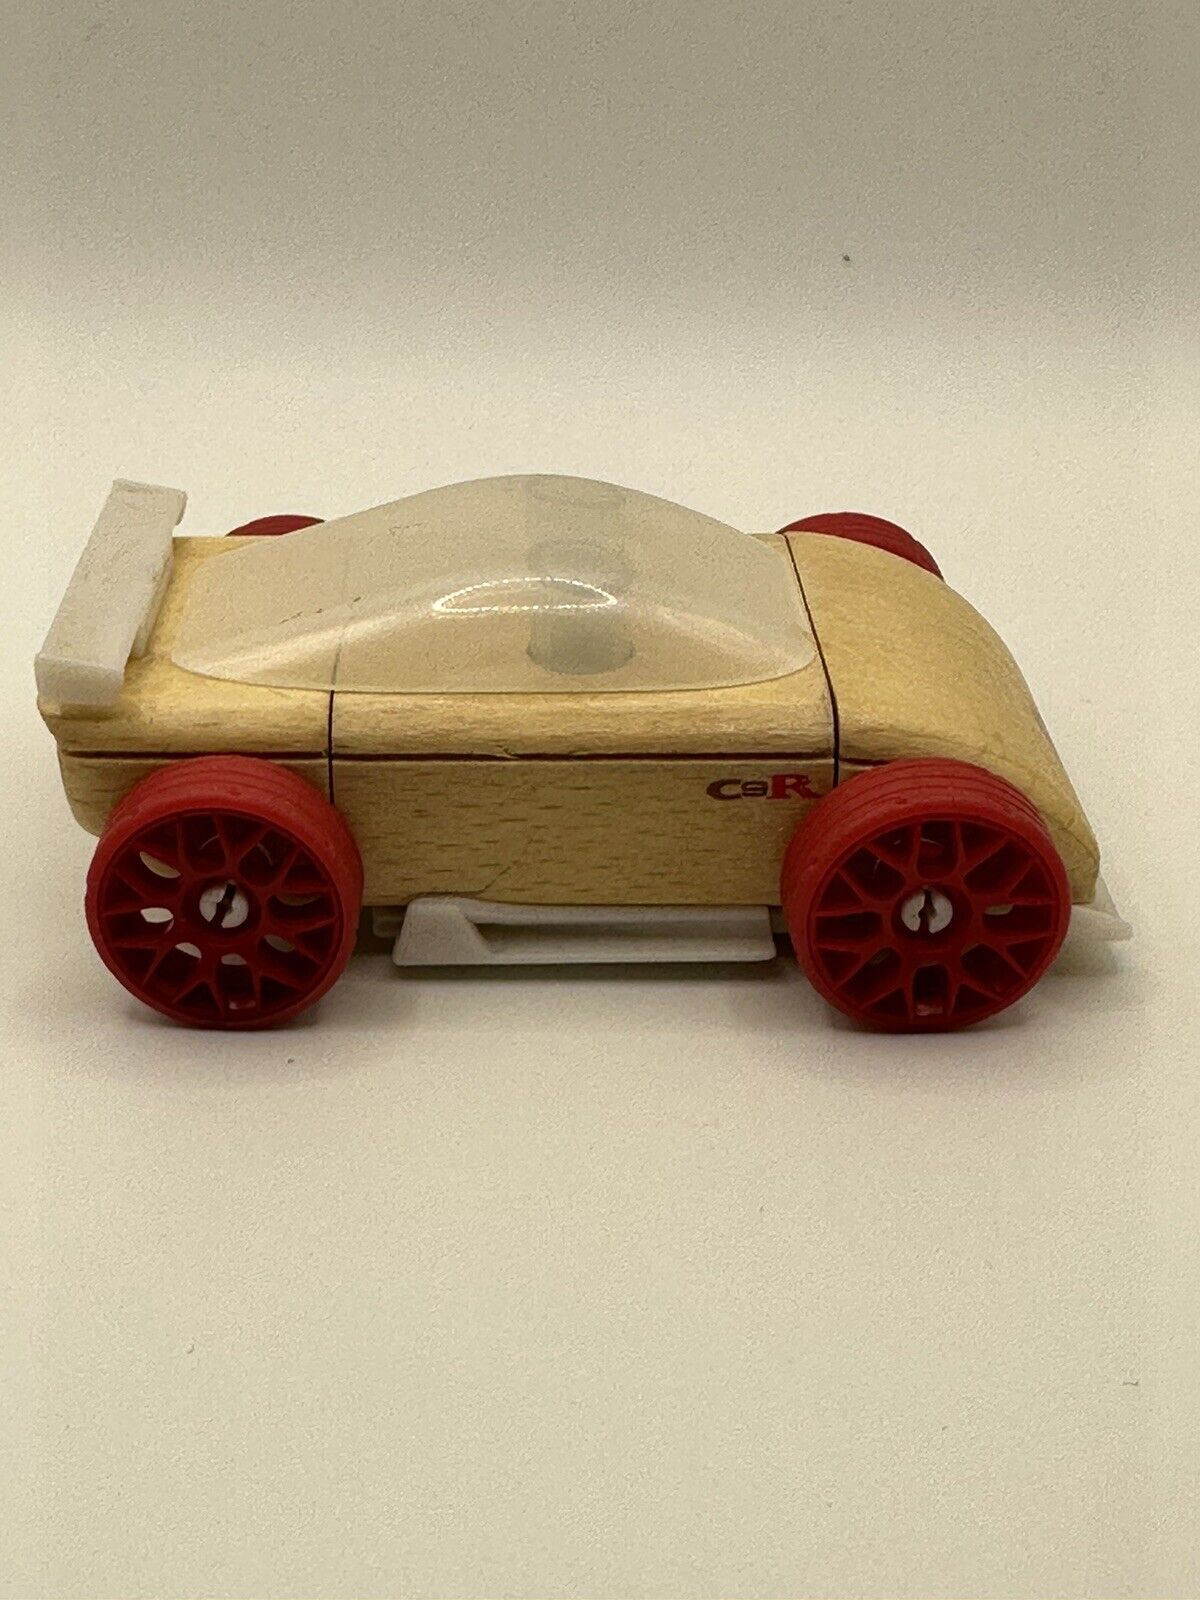 Automoblox Wooden Red and White C9R Sports Car with Interchangeable Parts